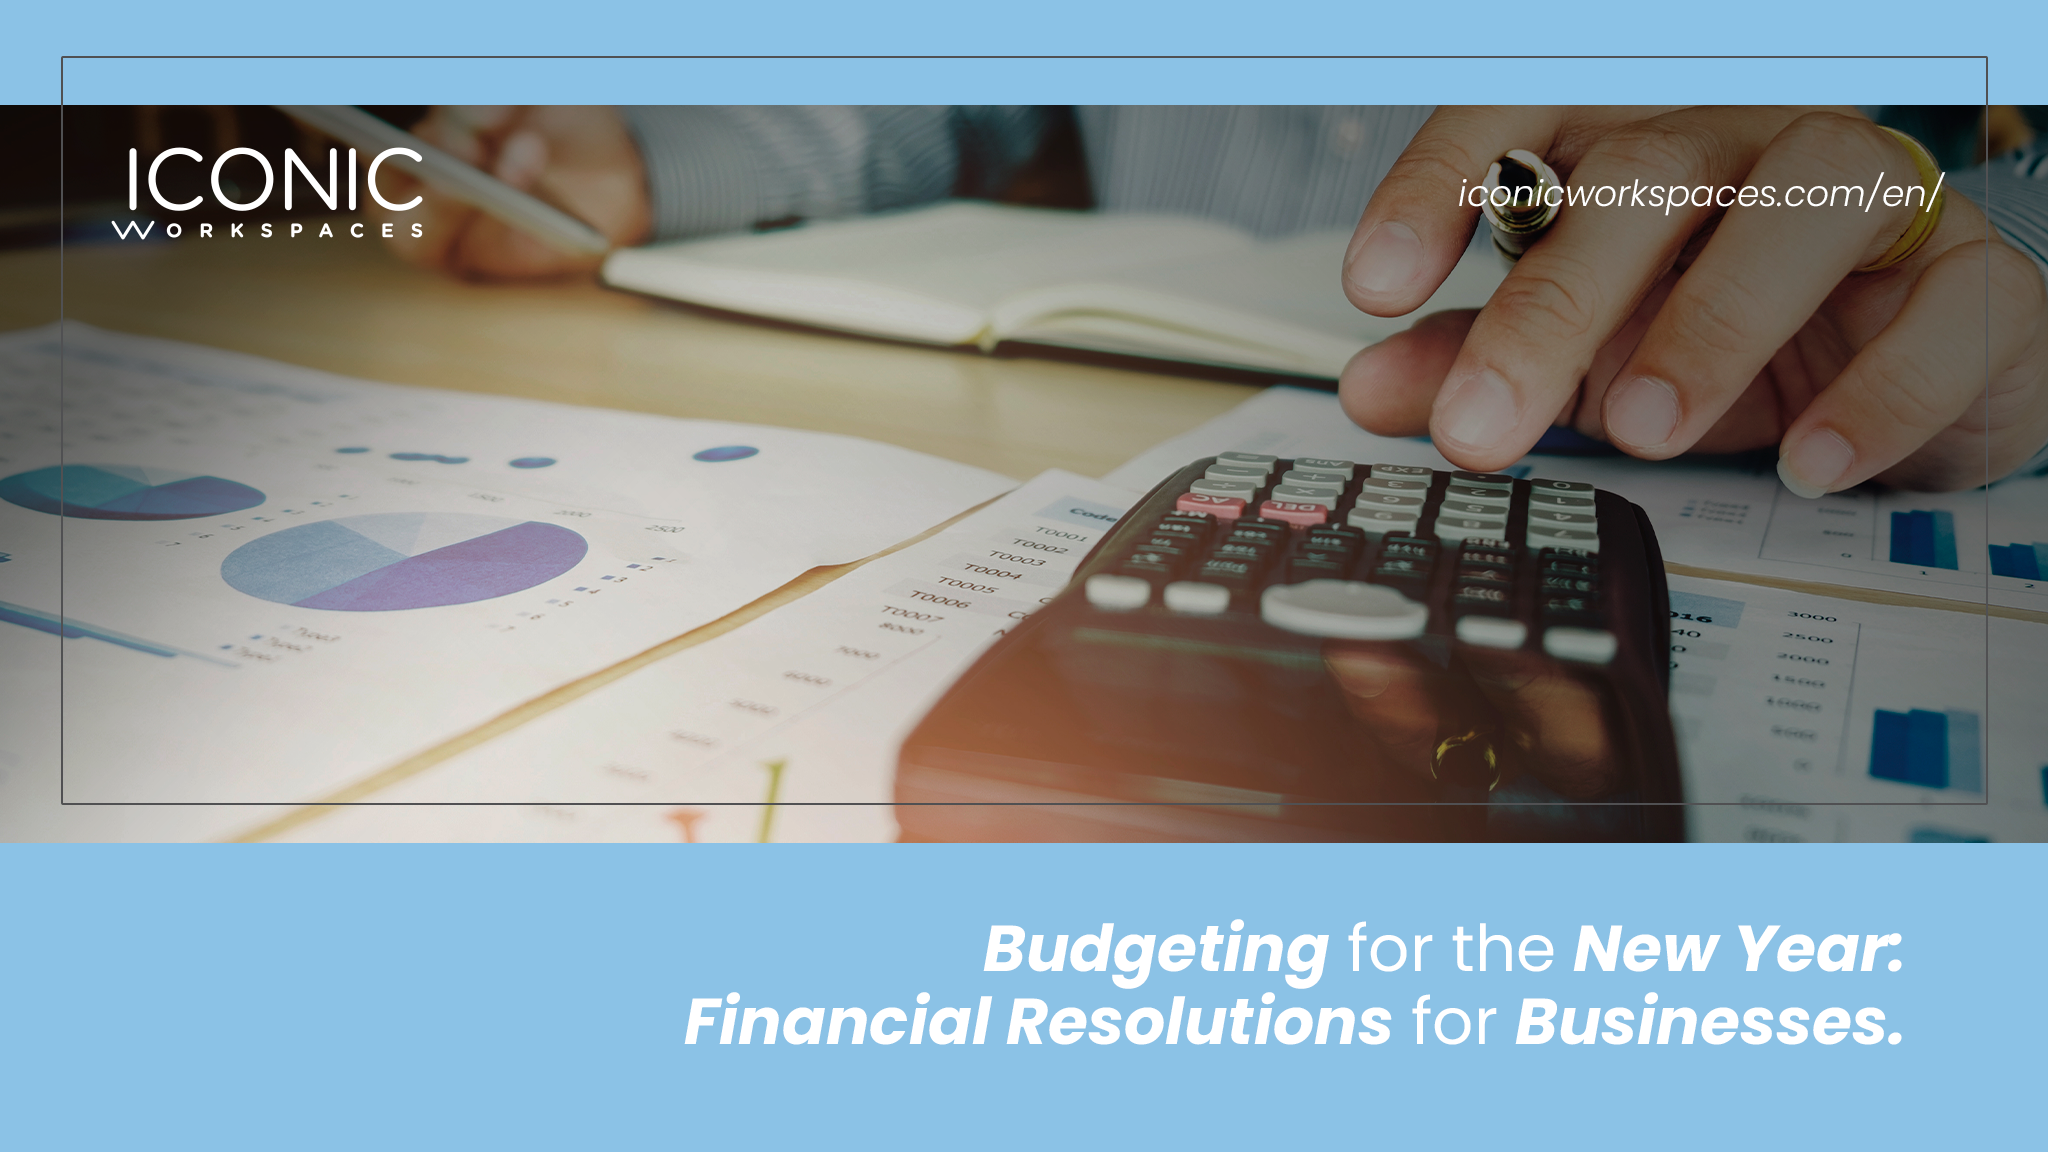 Budgeting for the New Year: Financial Resolutions for Businesses